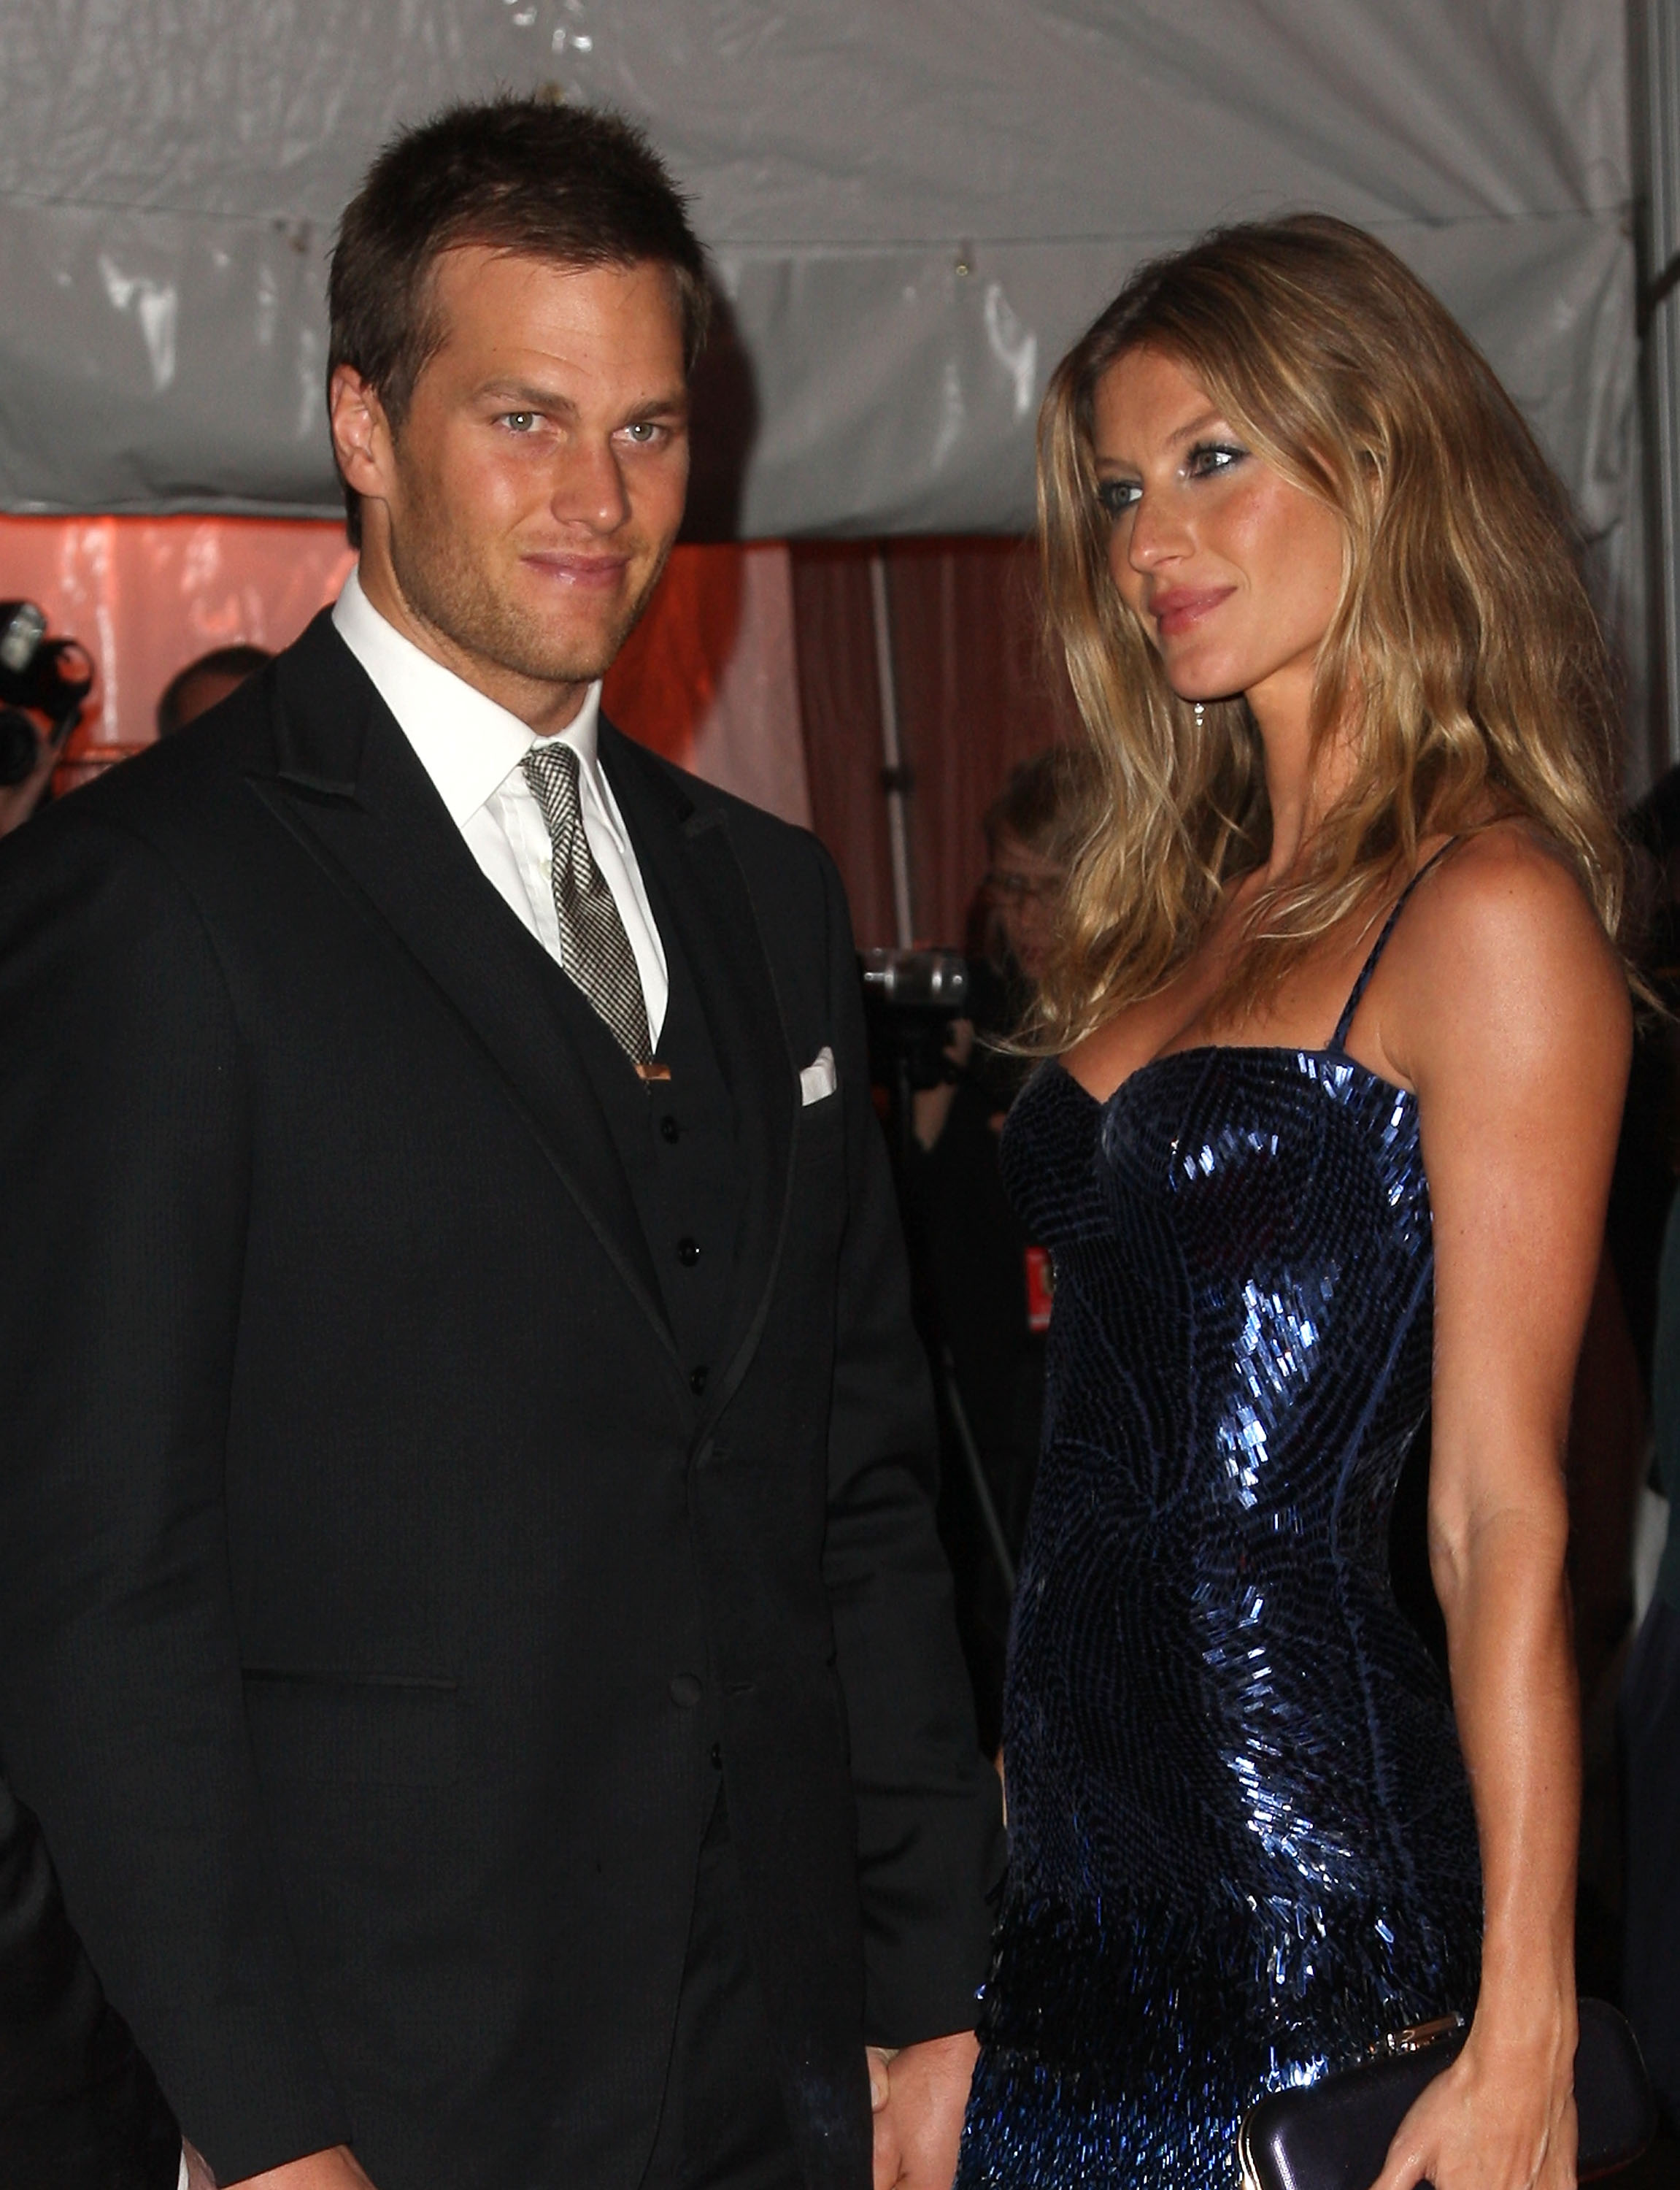 NEW YORK - MAY 04:  NFL player Tom Brady and model Gisele Bundchen attends 'The Model as Muse: Embodying Fashion' Costume Institute Gala at The Metropolitan Museum of Art on May 4, 2009 in New York City.  (Photo by Stephen Lovekin/Getty Images)